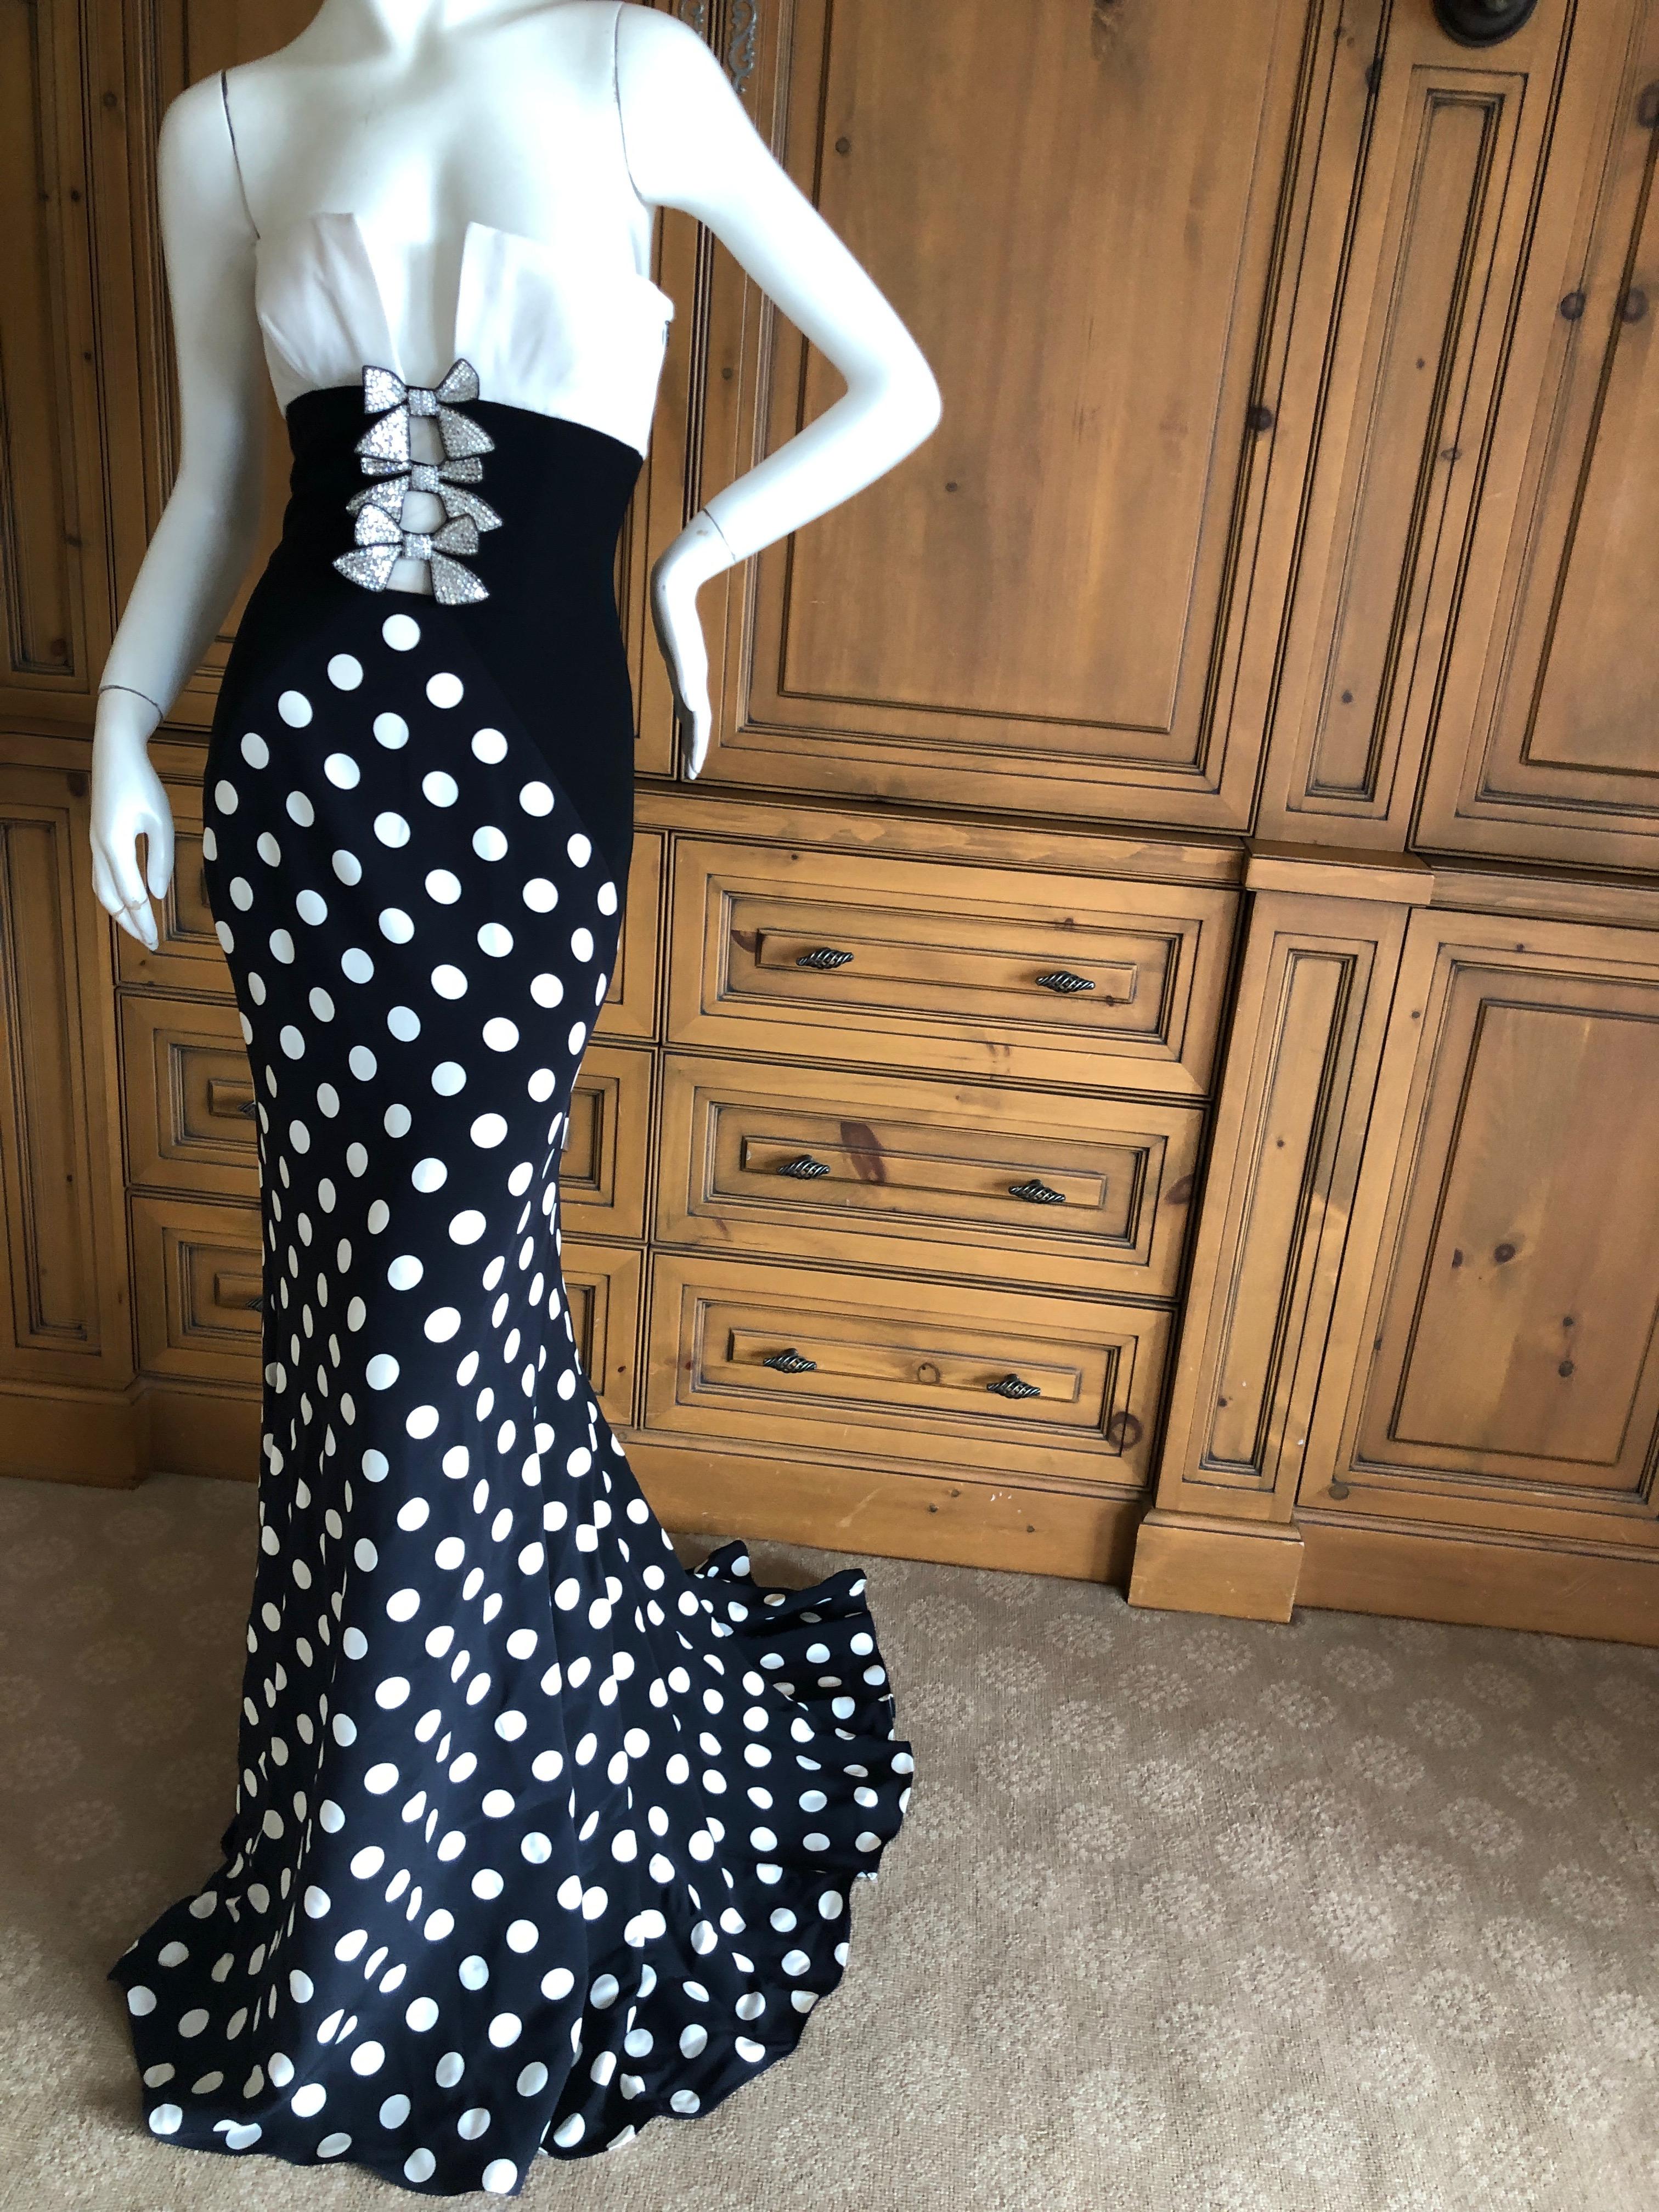 Valentino Vintage Polka Dot Strapless Mermaid Dress with Train and Crystal Bows.
New with tags
So pretty , the bows have sheer netting between them giving a peek a boo effect.
Size 6
Bust  34